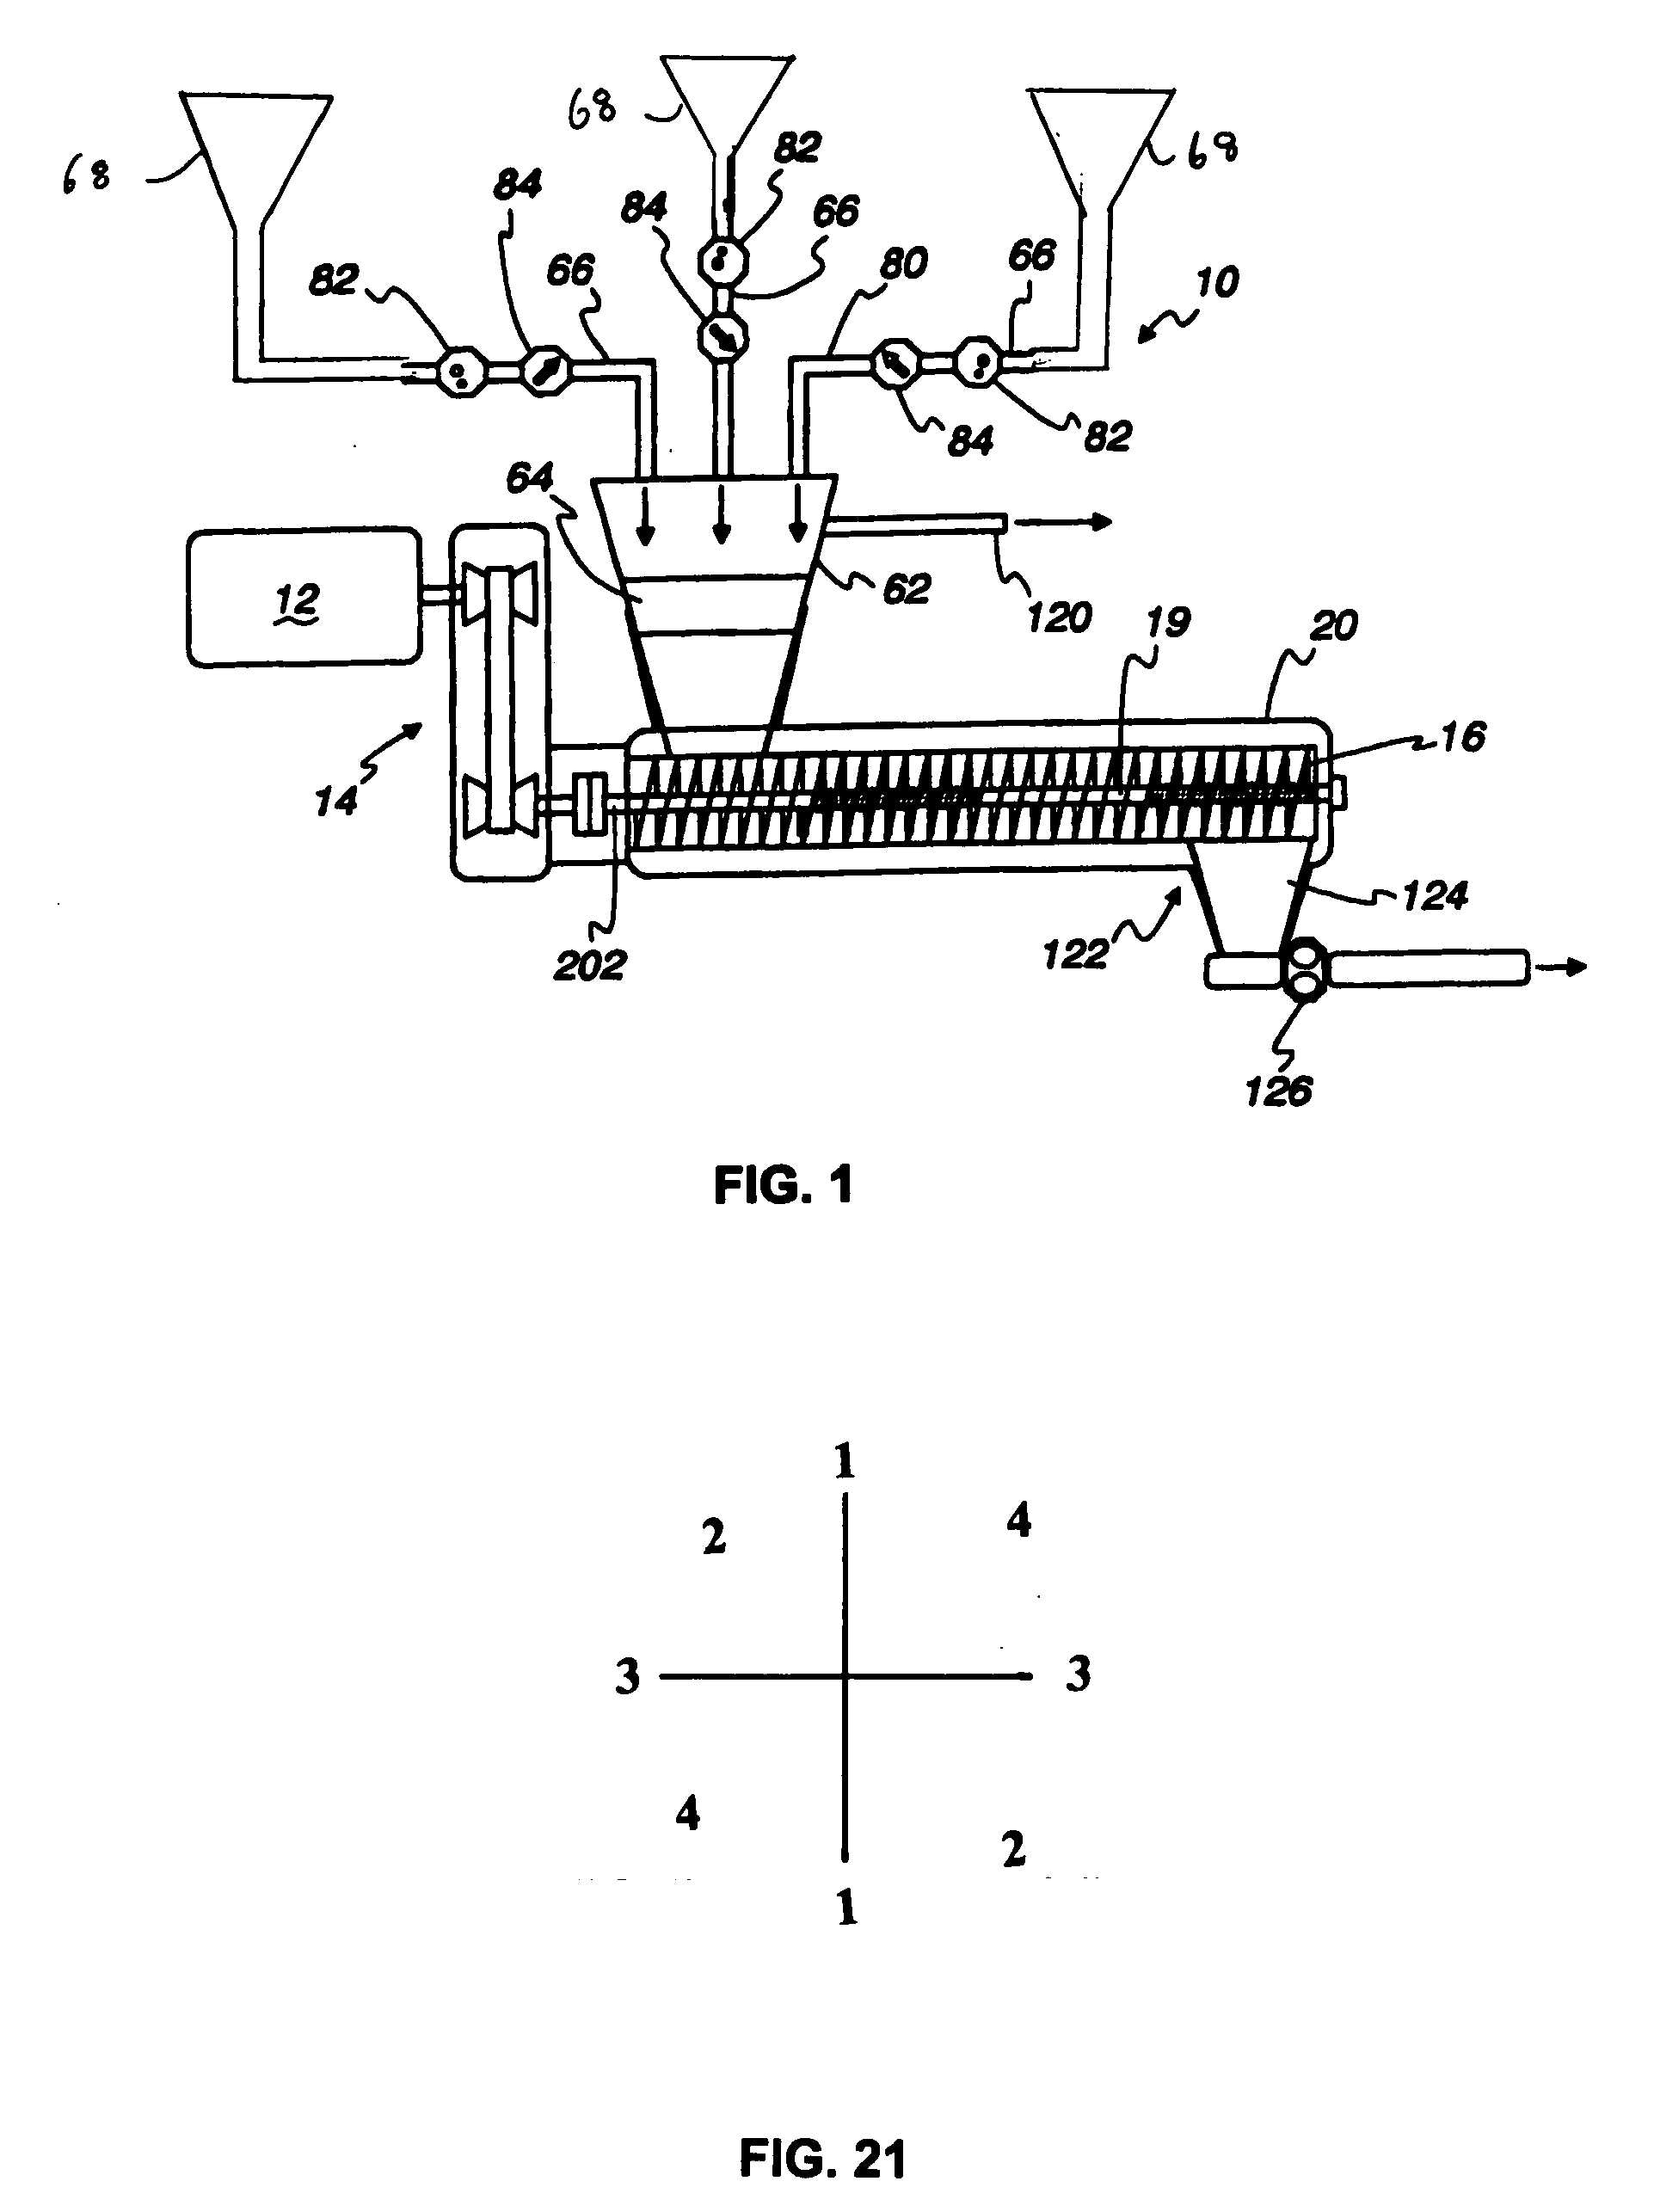 Method and apparatus for accelerating formation of functional meat mixtures